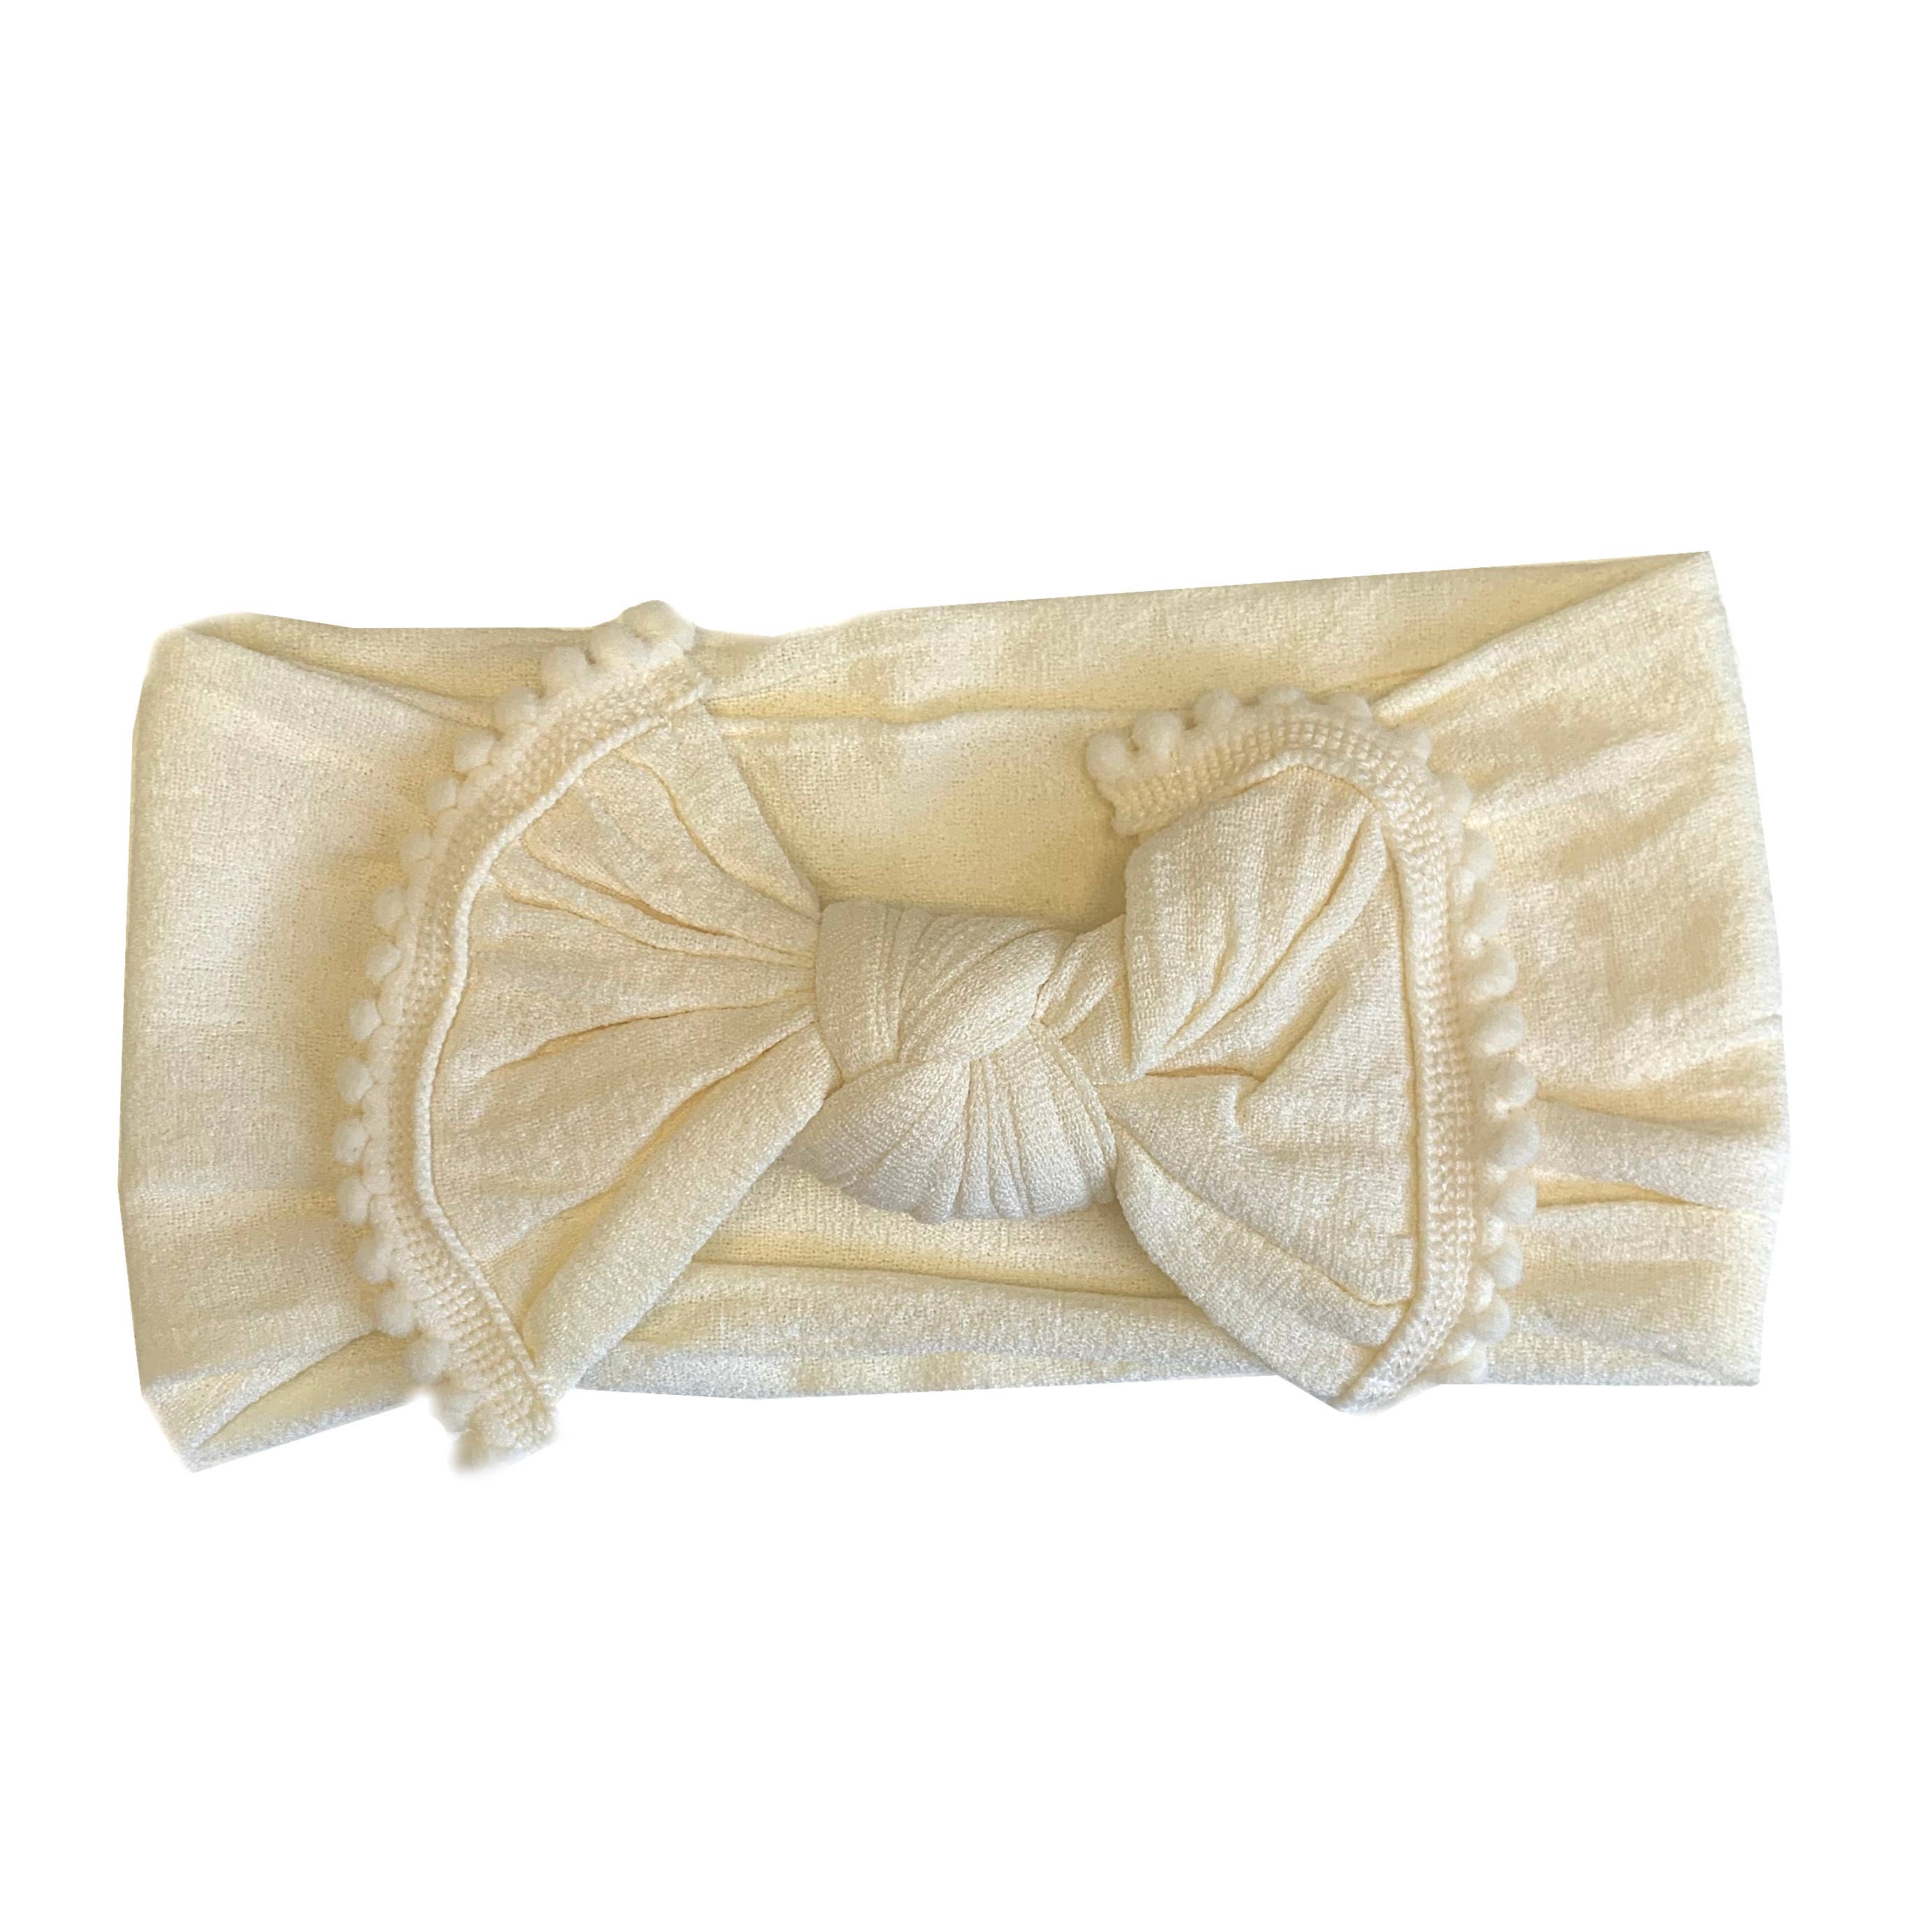 The softest baby headbands ever! Pair these adorable accessories with onesies, dresses, bloomers, and gowns for the cutest girl outfits. Color/Print: Cream Fabric: Nylon Sizing: Size 1 (0-12M) Fit: Stretchy Wash: Hand wash / Lay flat to dry Imported